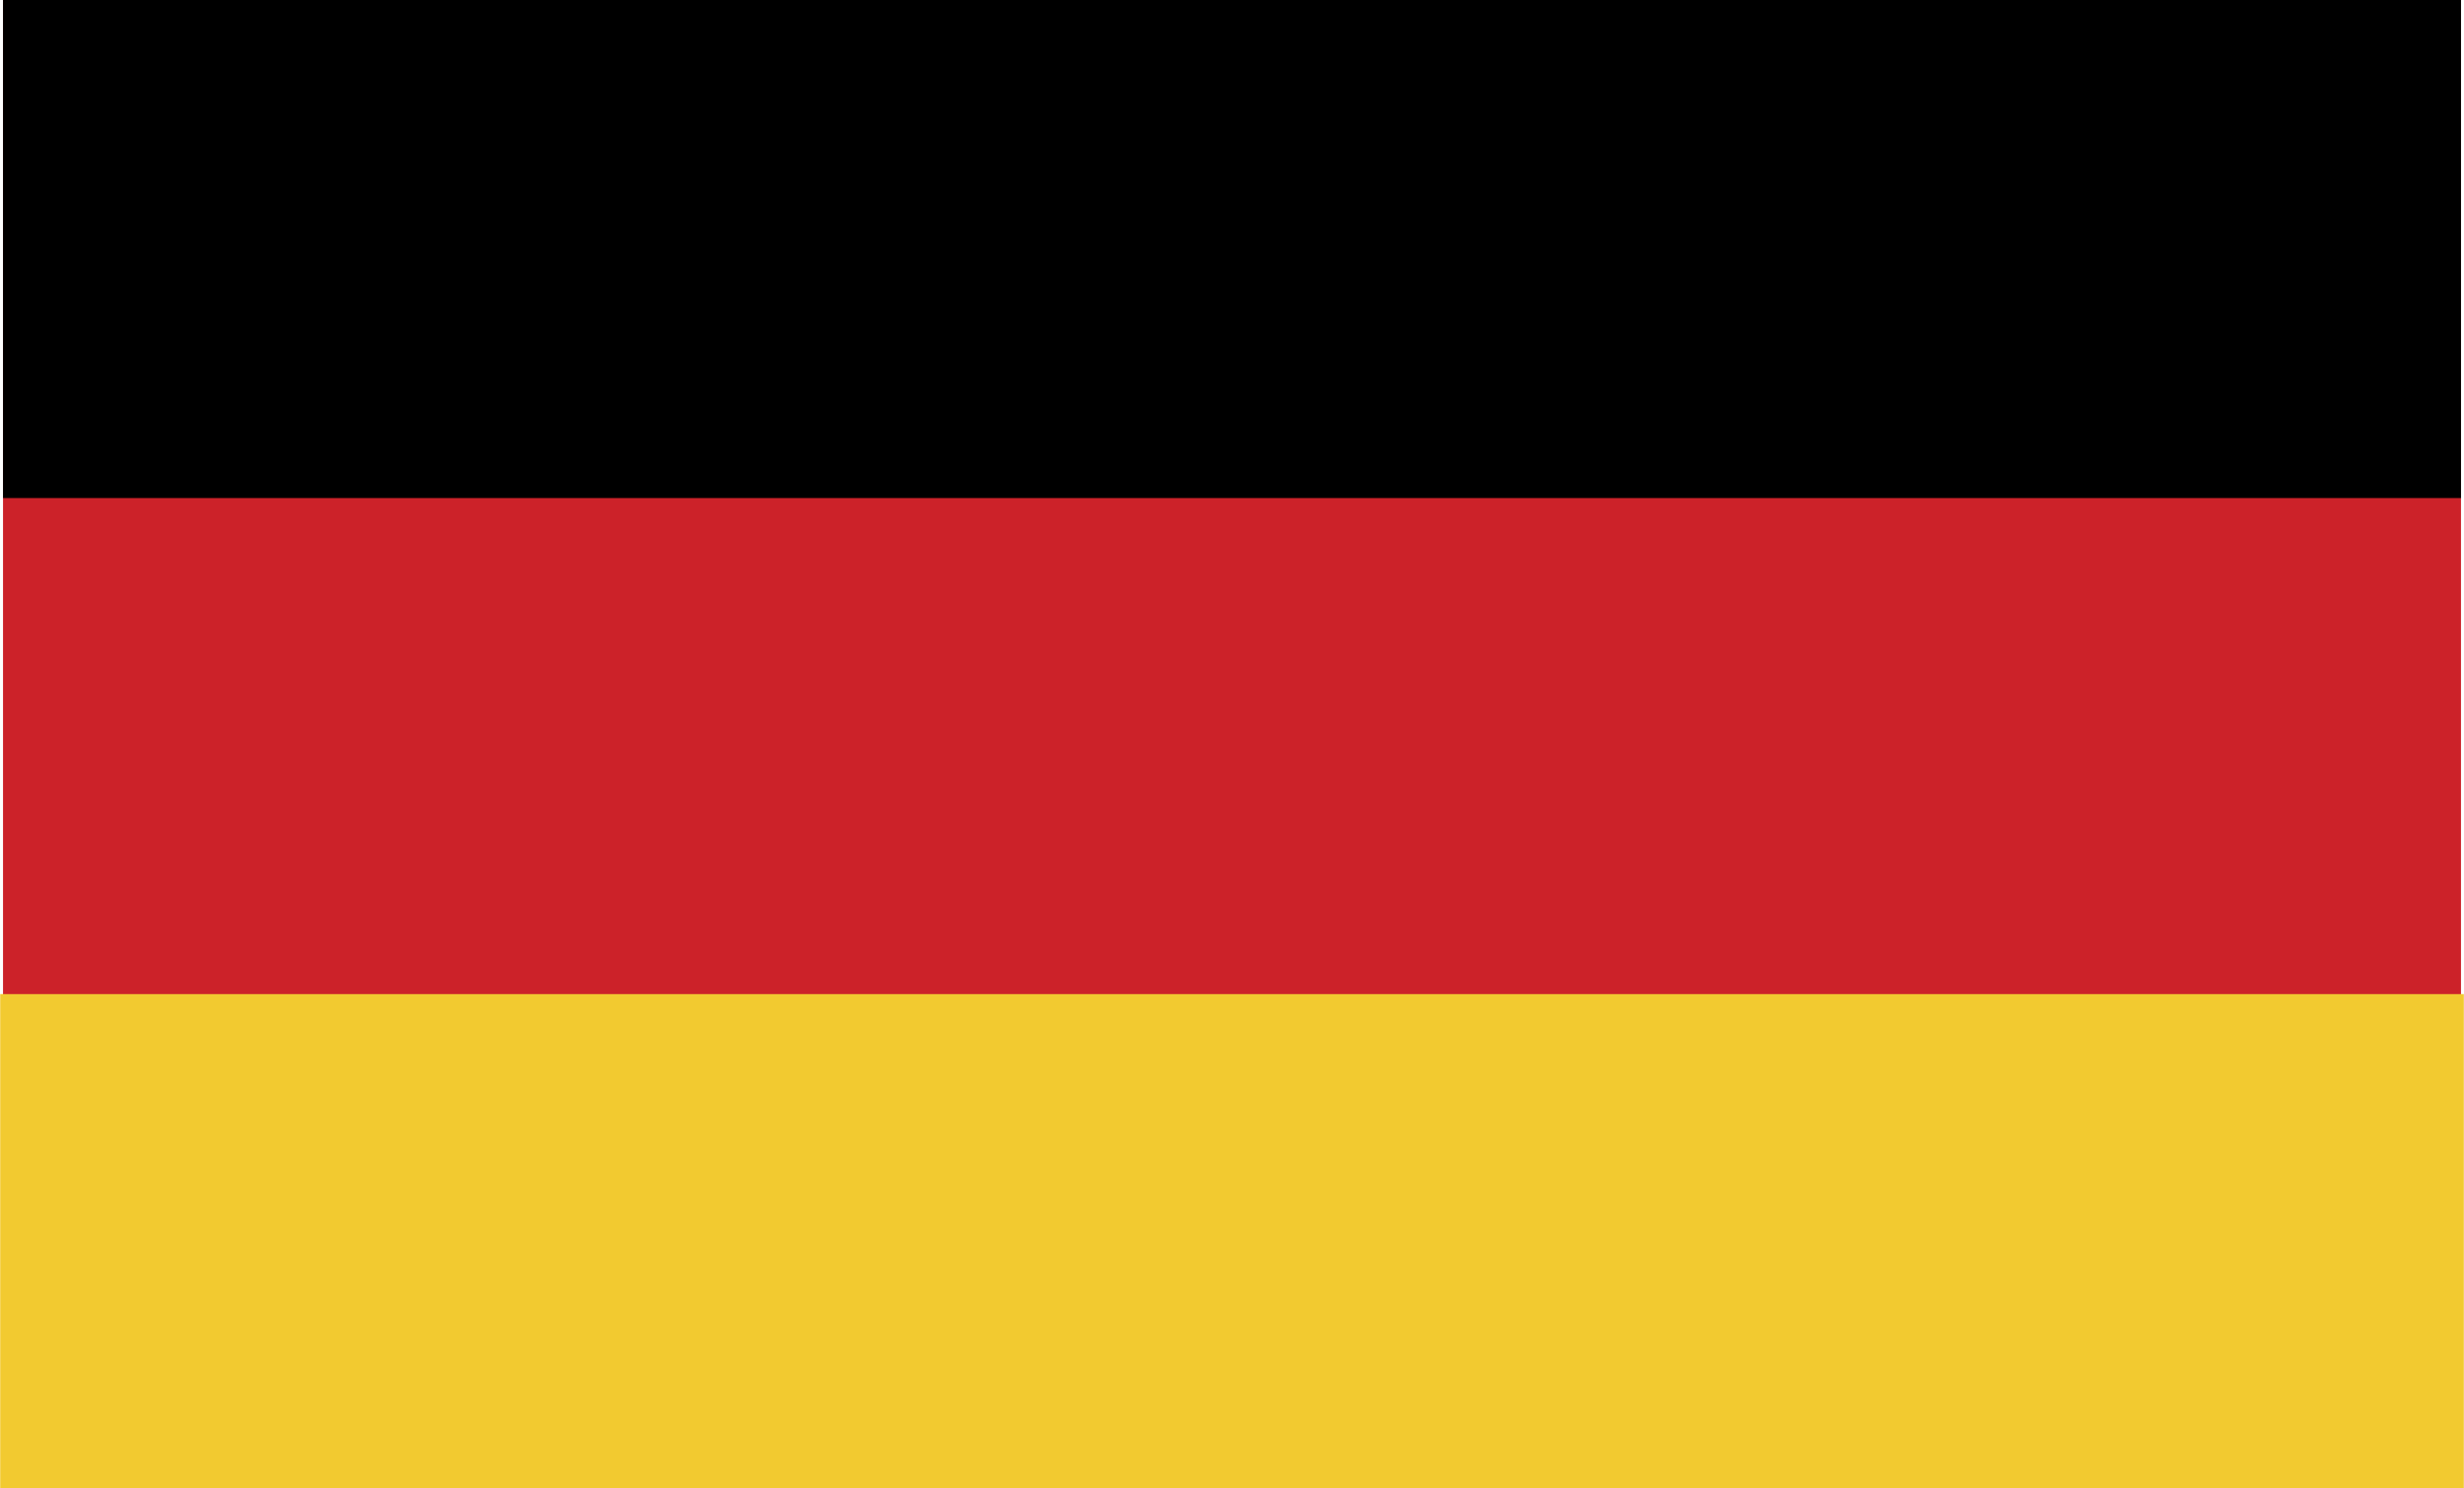 1974 FIFA World Cup (West Germany) logo colors